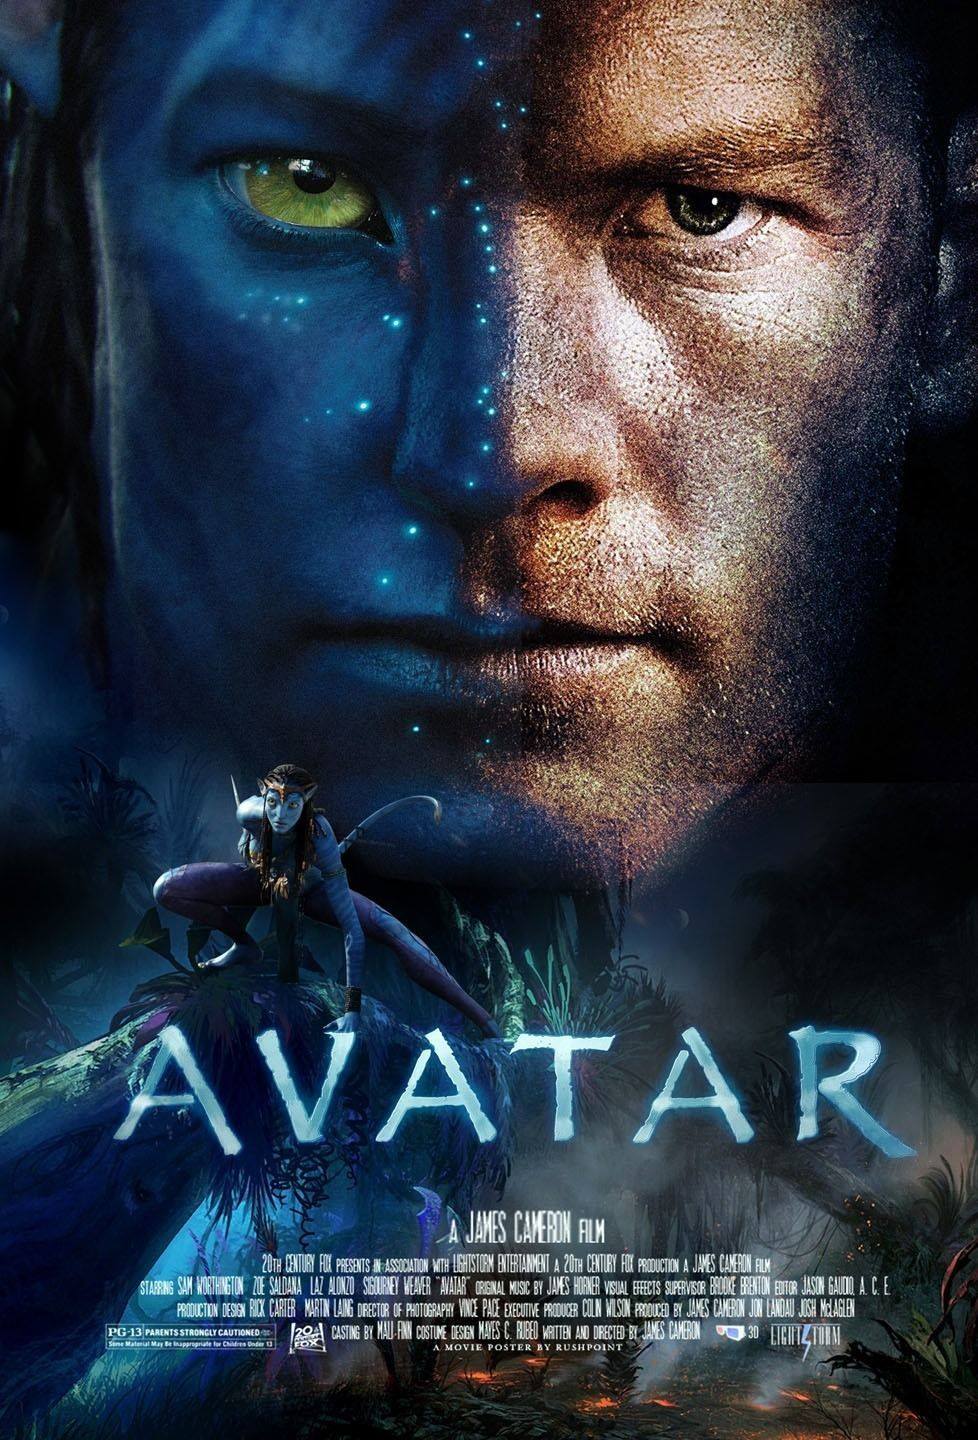 Avatar The Way of Water Review EyePopping but Lacking Dimension   Variety